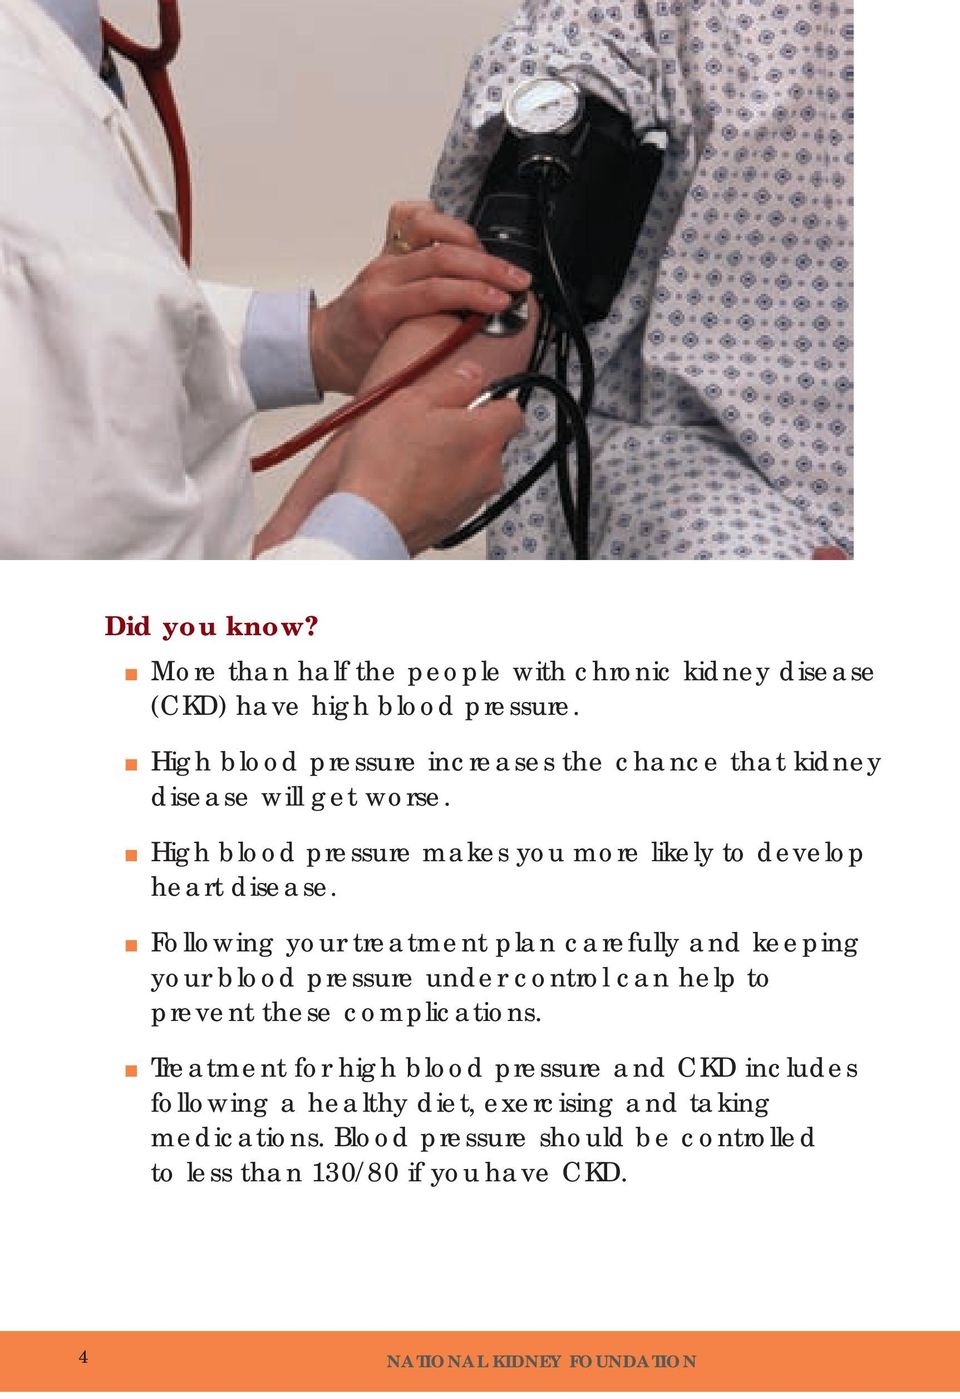 n Following your treatment plan carefully and keeping your blood pressure under control can help to prevent these complications.